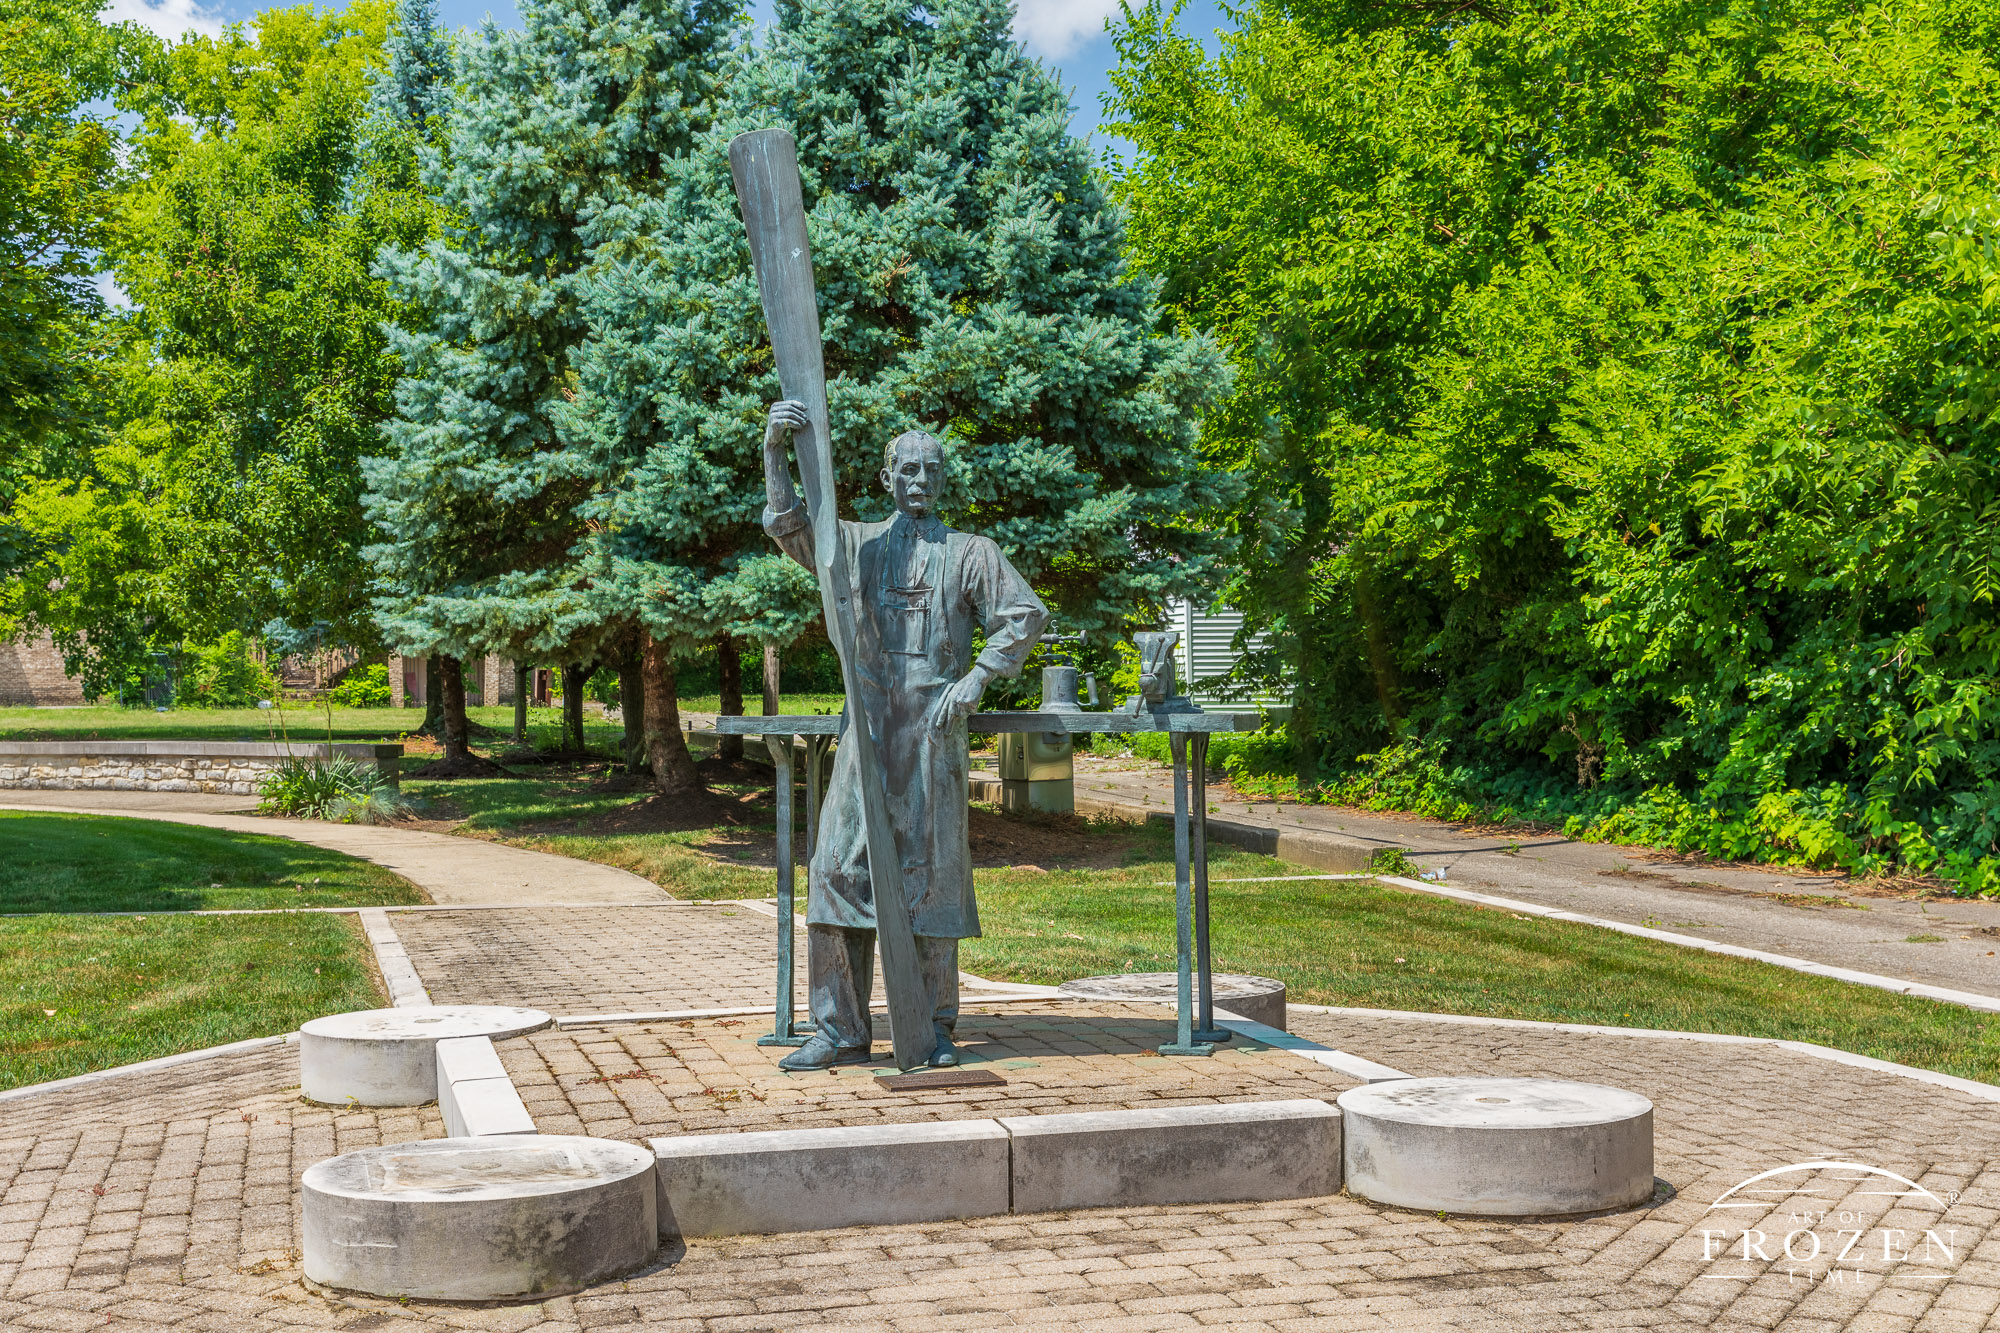 A bronze Wilbur Wright sculpture standing with an eight-foot propeller on the site of the former Wright Aeronautical Laboratory